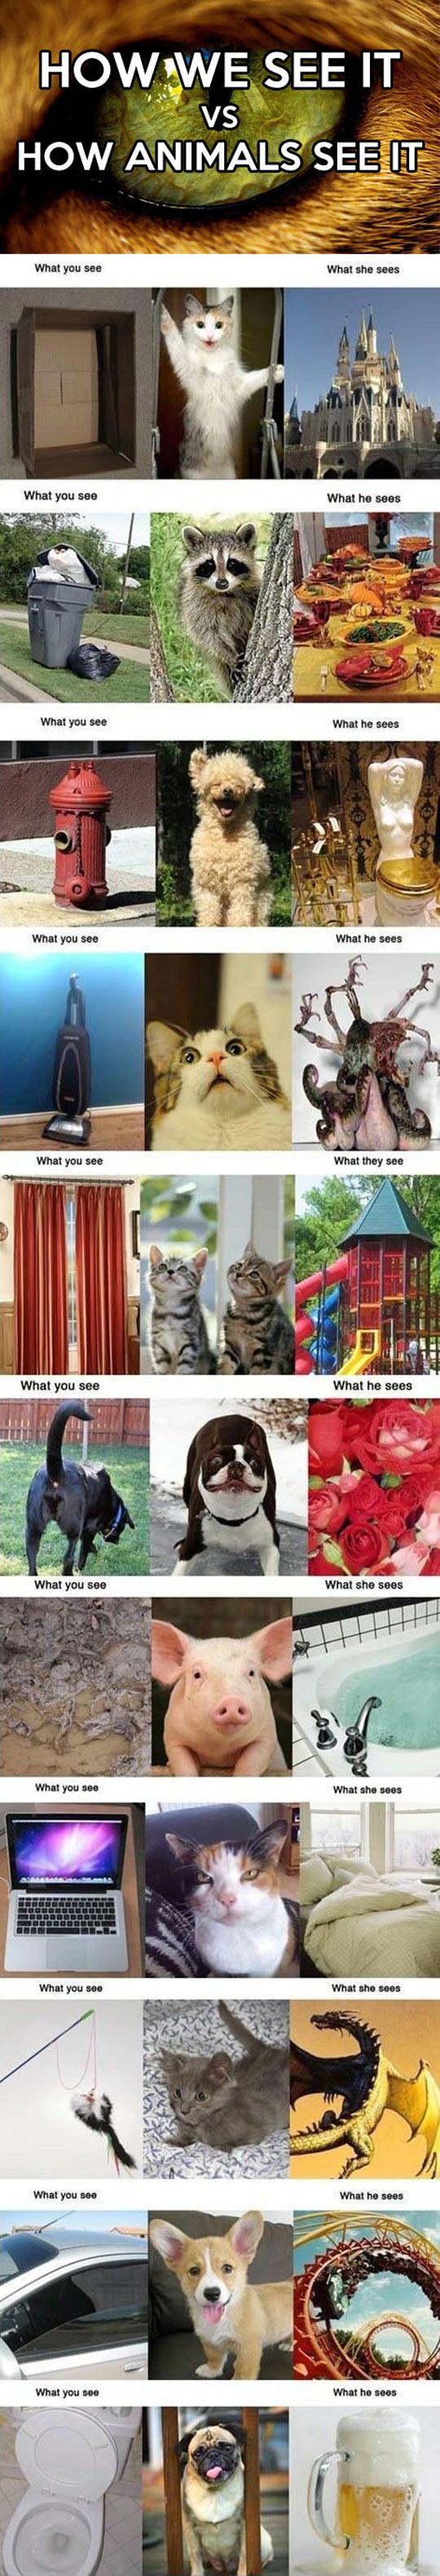 How Humans See It Vs. How Animals See It